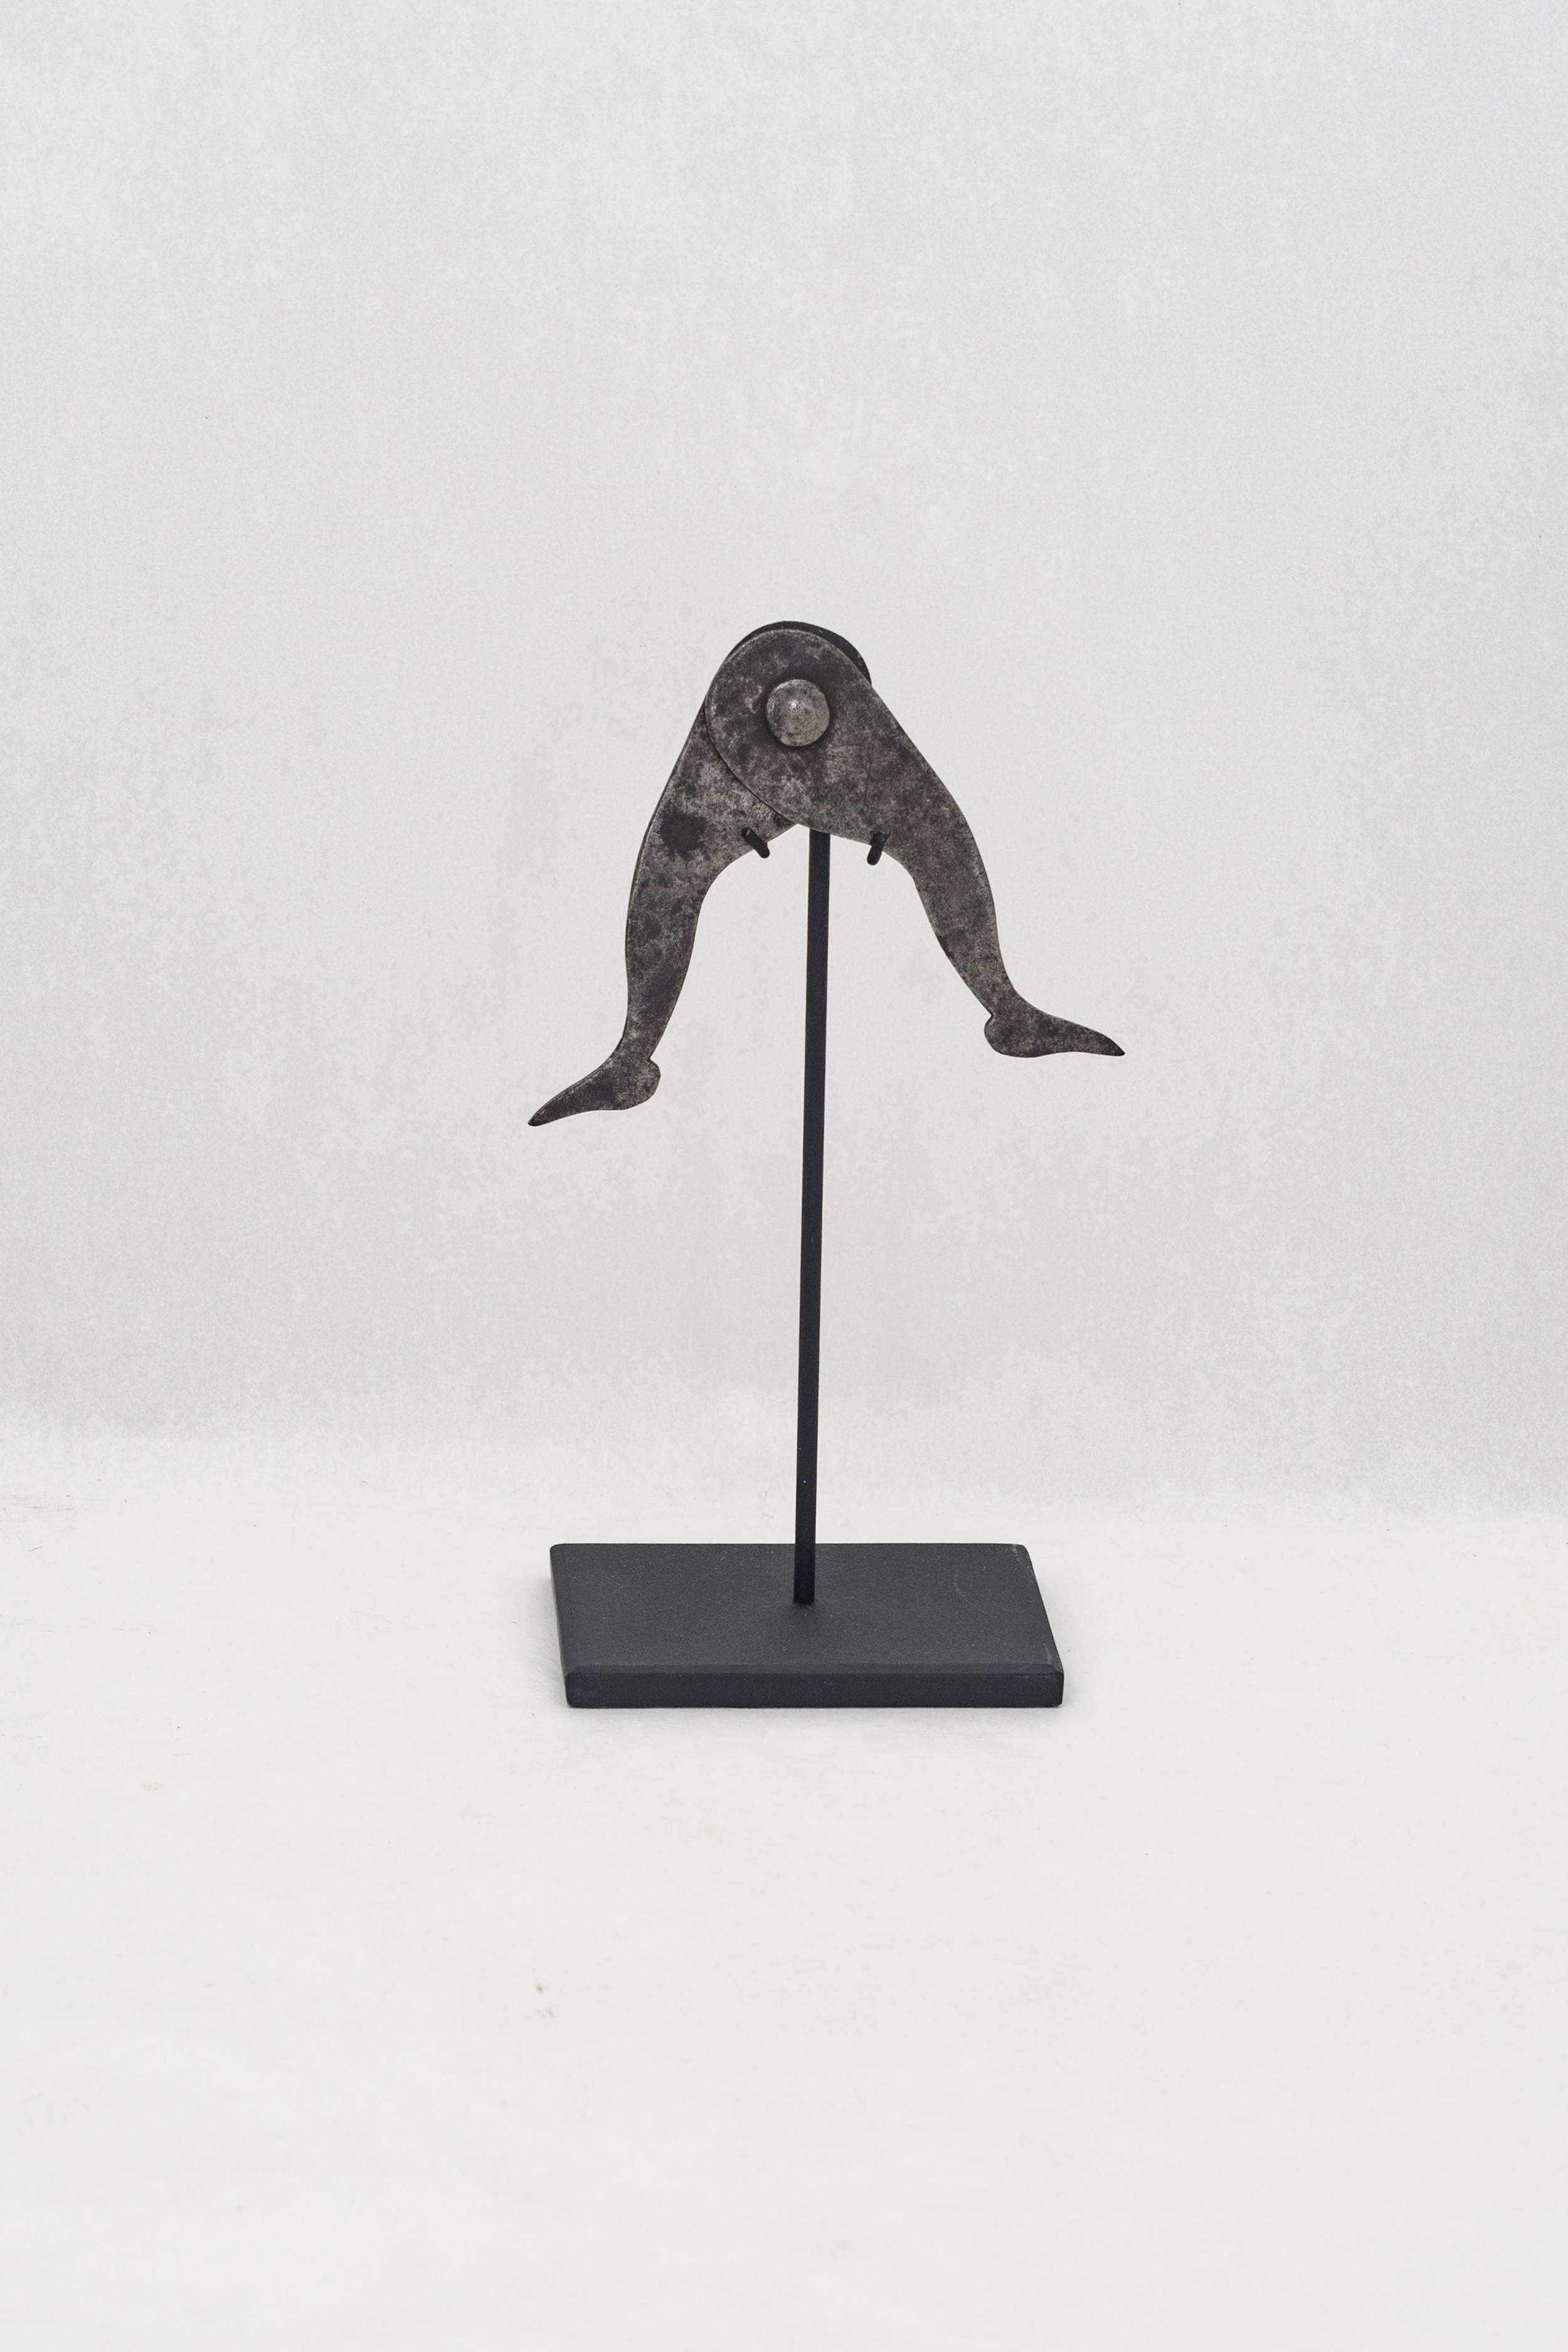 A collection of ladies leg calipers
Group of nine user-made whimsical calipers in the form
of ladies legs, cut from steel.
Used to measure inside and outside diameters.
Each on a custom stand.

Measurements:
Calipers – 3” to 8”
Height on